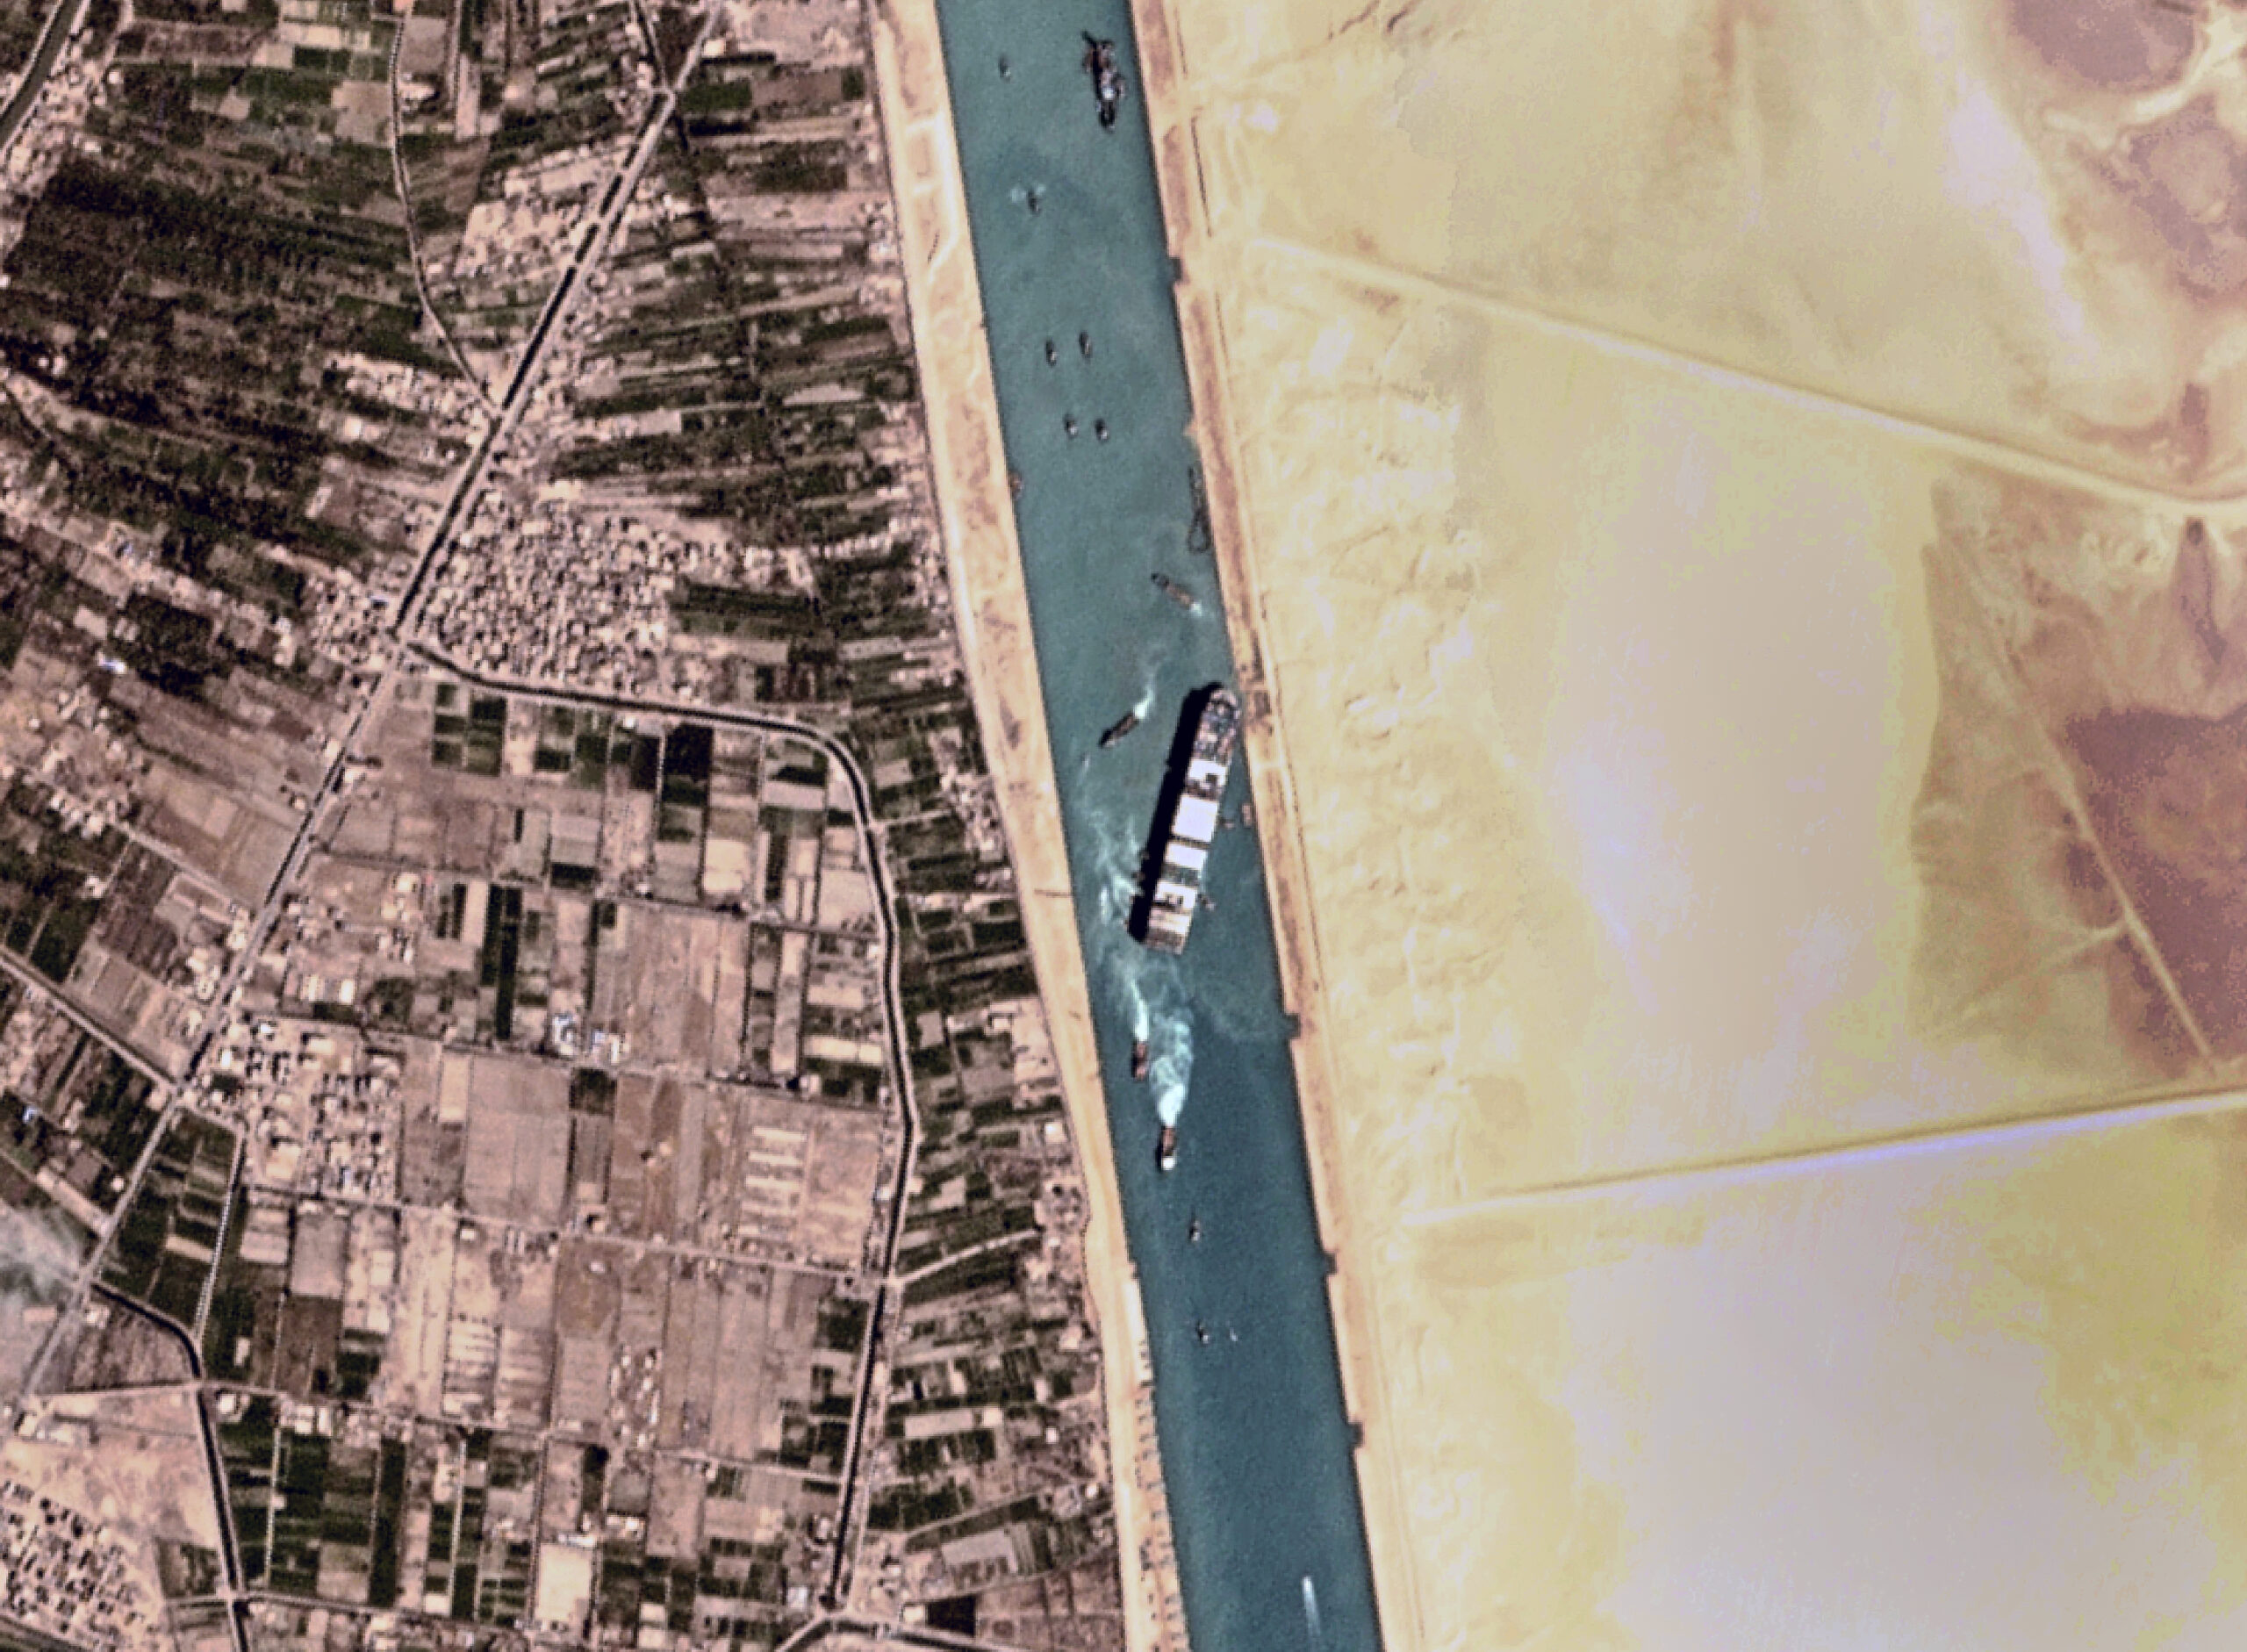 This satellite photo from Planet Labs Inc. shows the Ever Given cargo ship stuck in Egypt's Suez Canal Monday, March 29, 2021. Engineers on Monday "partially refloated" the colossal container ship that continues to block traffic through the Suez Canal, authorities said, without providing further details about when the vessel would be set free. (Planet Labs Inc. via AP)